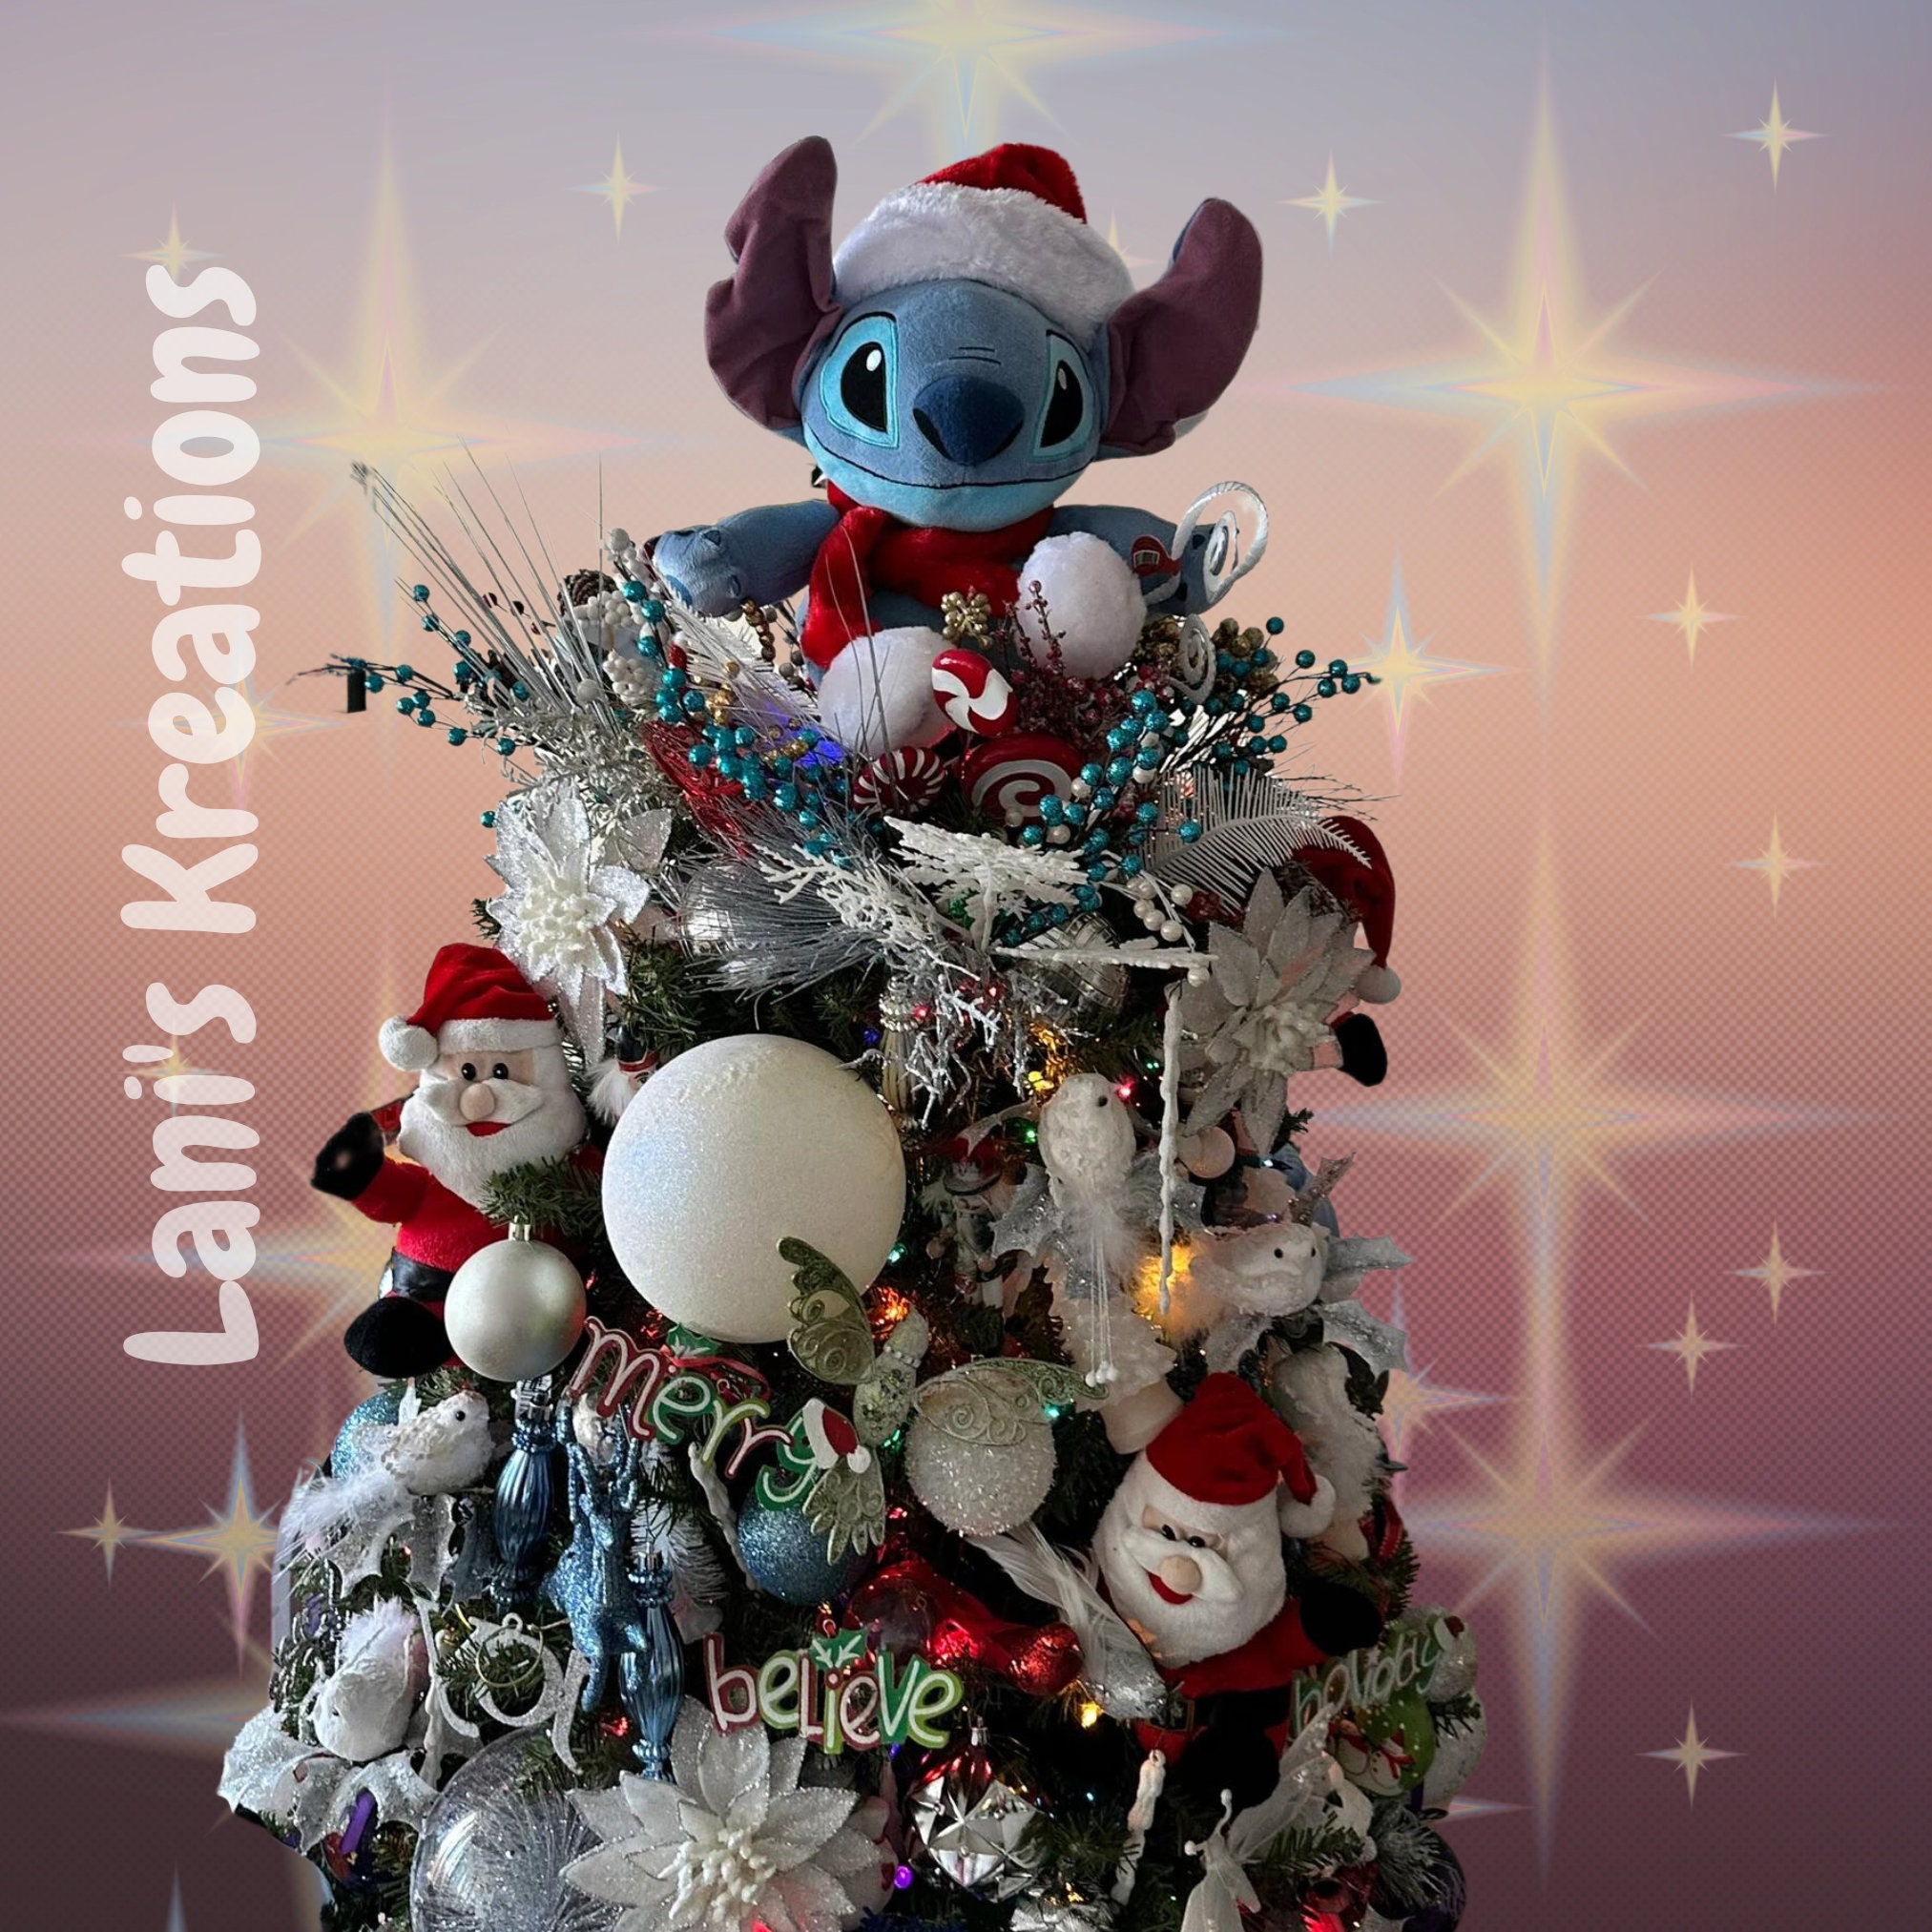 Pin by Brittany-LeRae Young on STiTCH 💙✨  Disney christmas ornaments, Christmas  tree decorating themes, Christmas tree themes